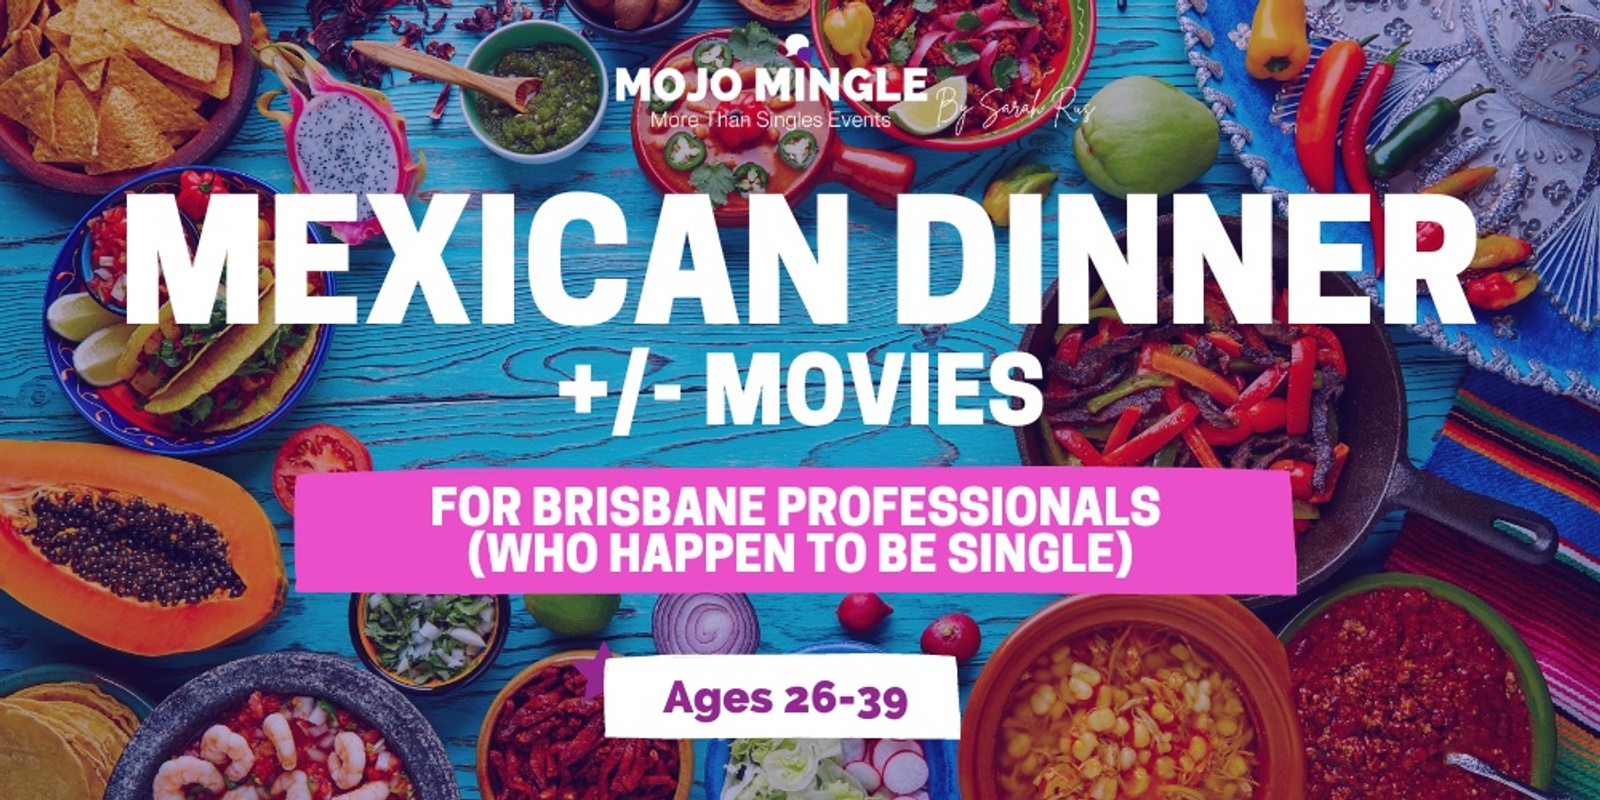 Mexican Dinner +/- Movies For Brisbane Professionals Who Happen To Be Single| Ages 26 - 39ish